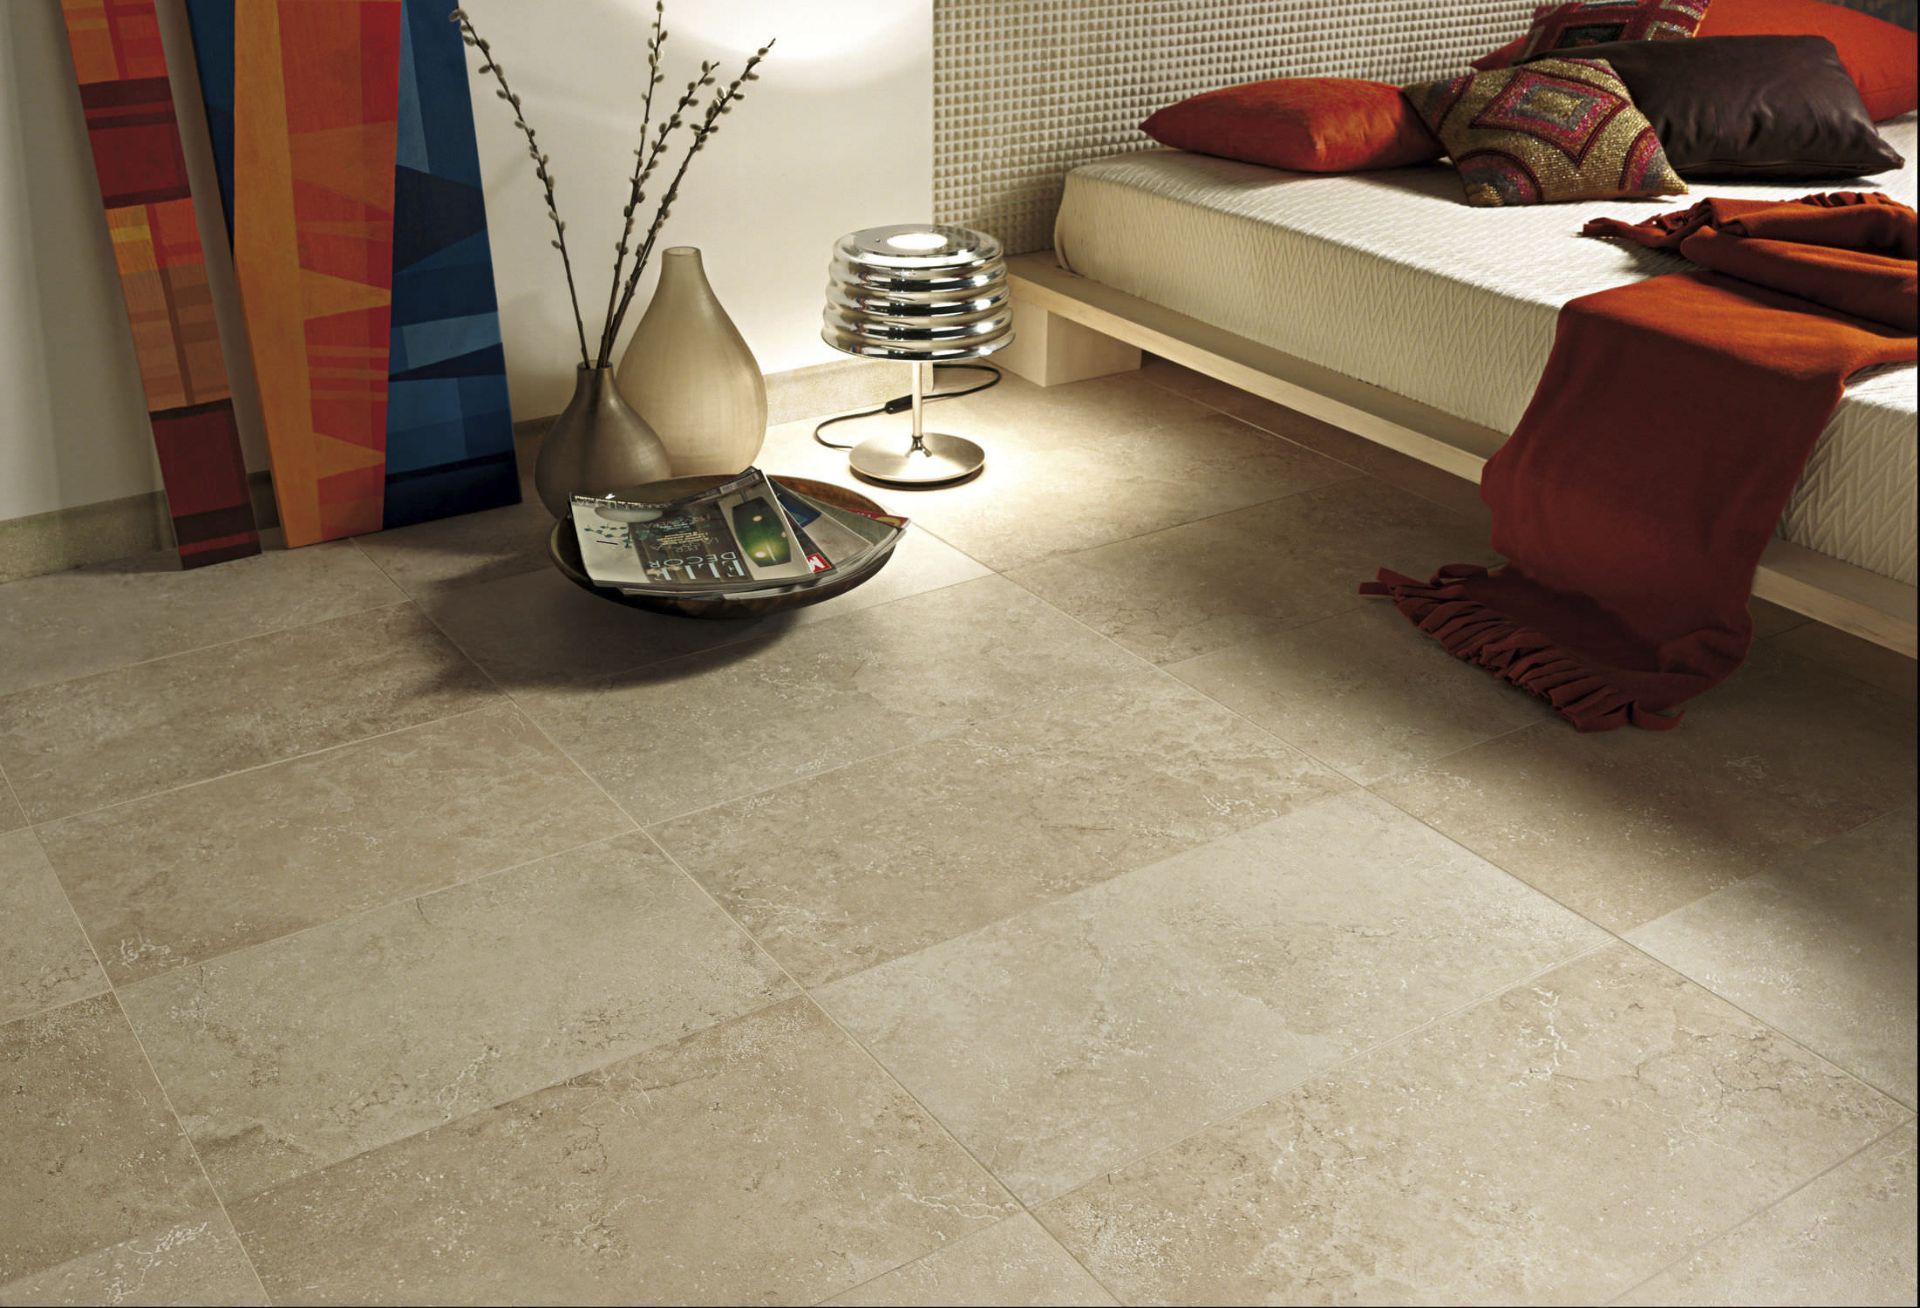 NEW 7.1 Square Meters of Hama Beige Wall and Floor Tiles. 450x450mm per tile, 10mm thick. 1.42... - Image 4 of 4